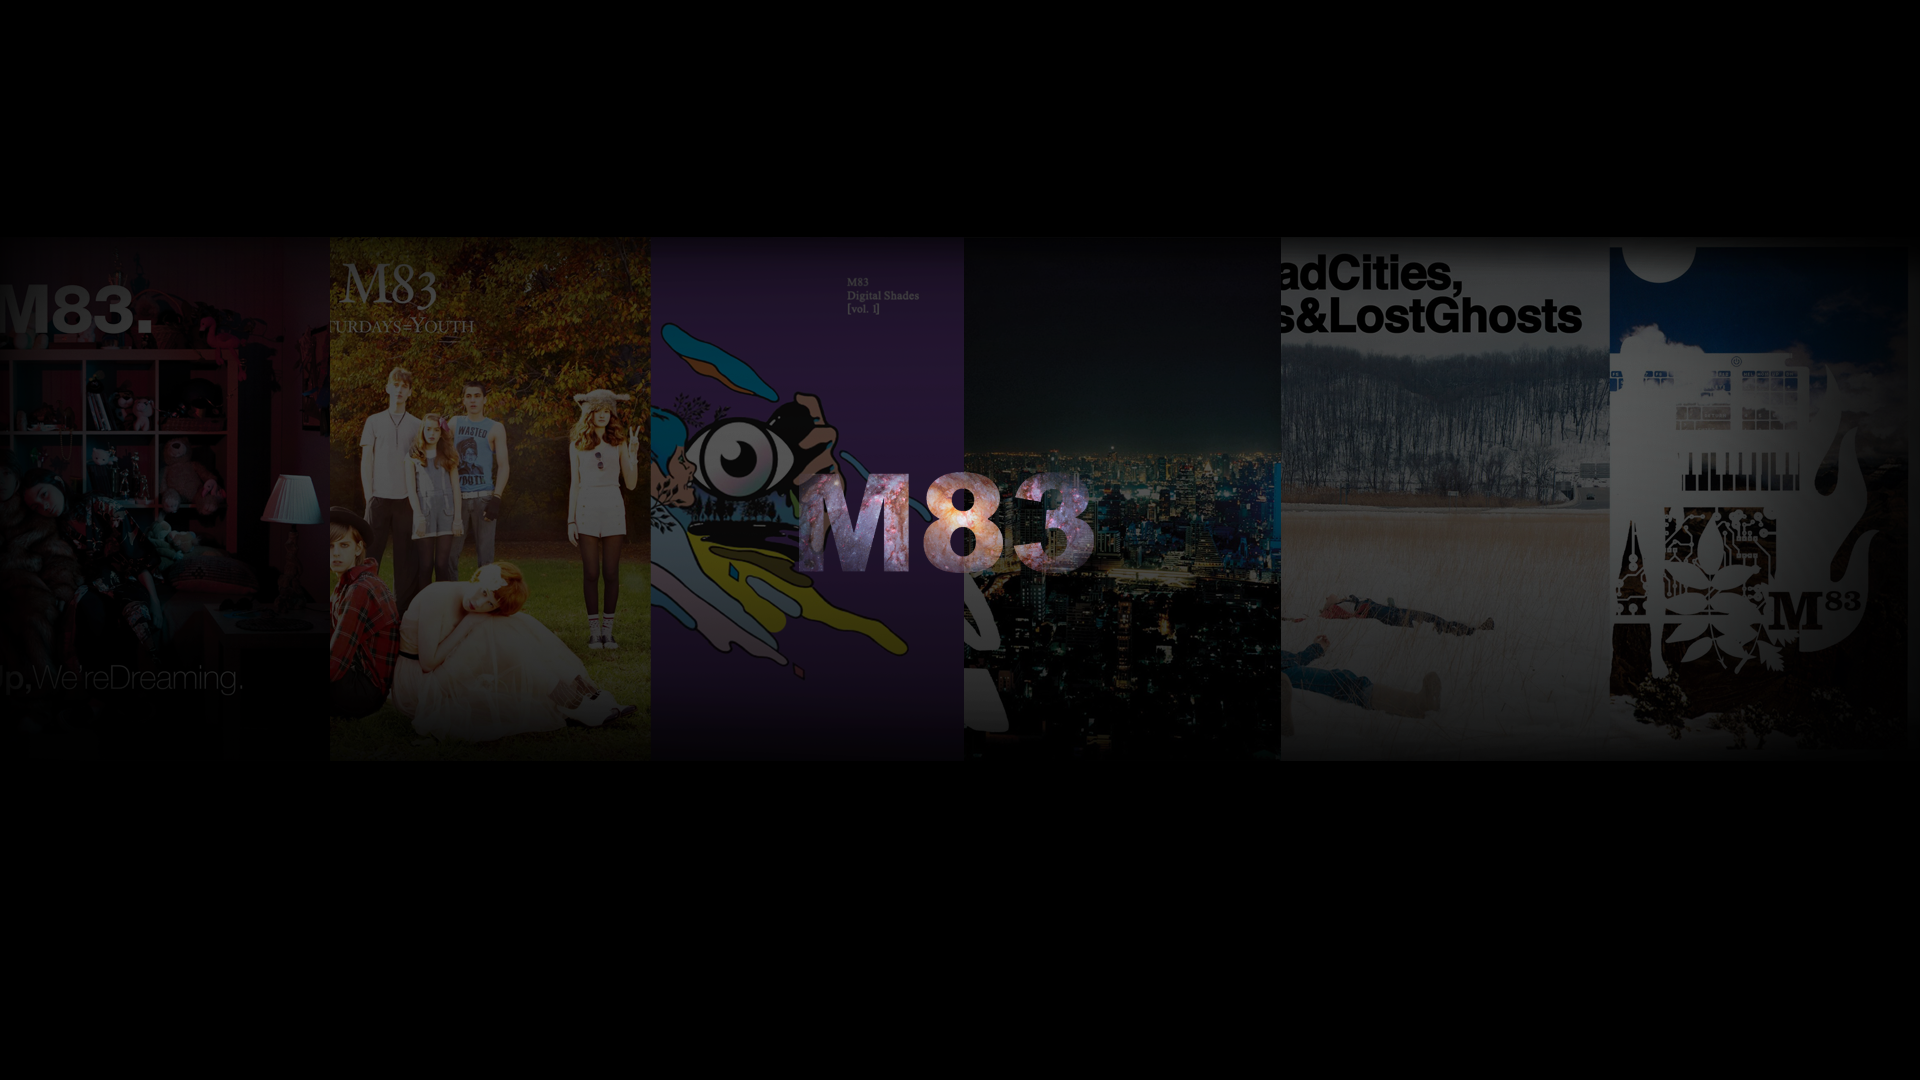 Tried To Make A Wallpaper For My Favourite M83 Albums